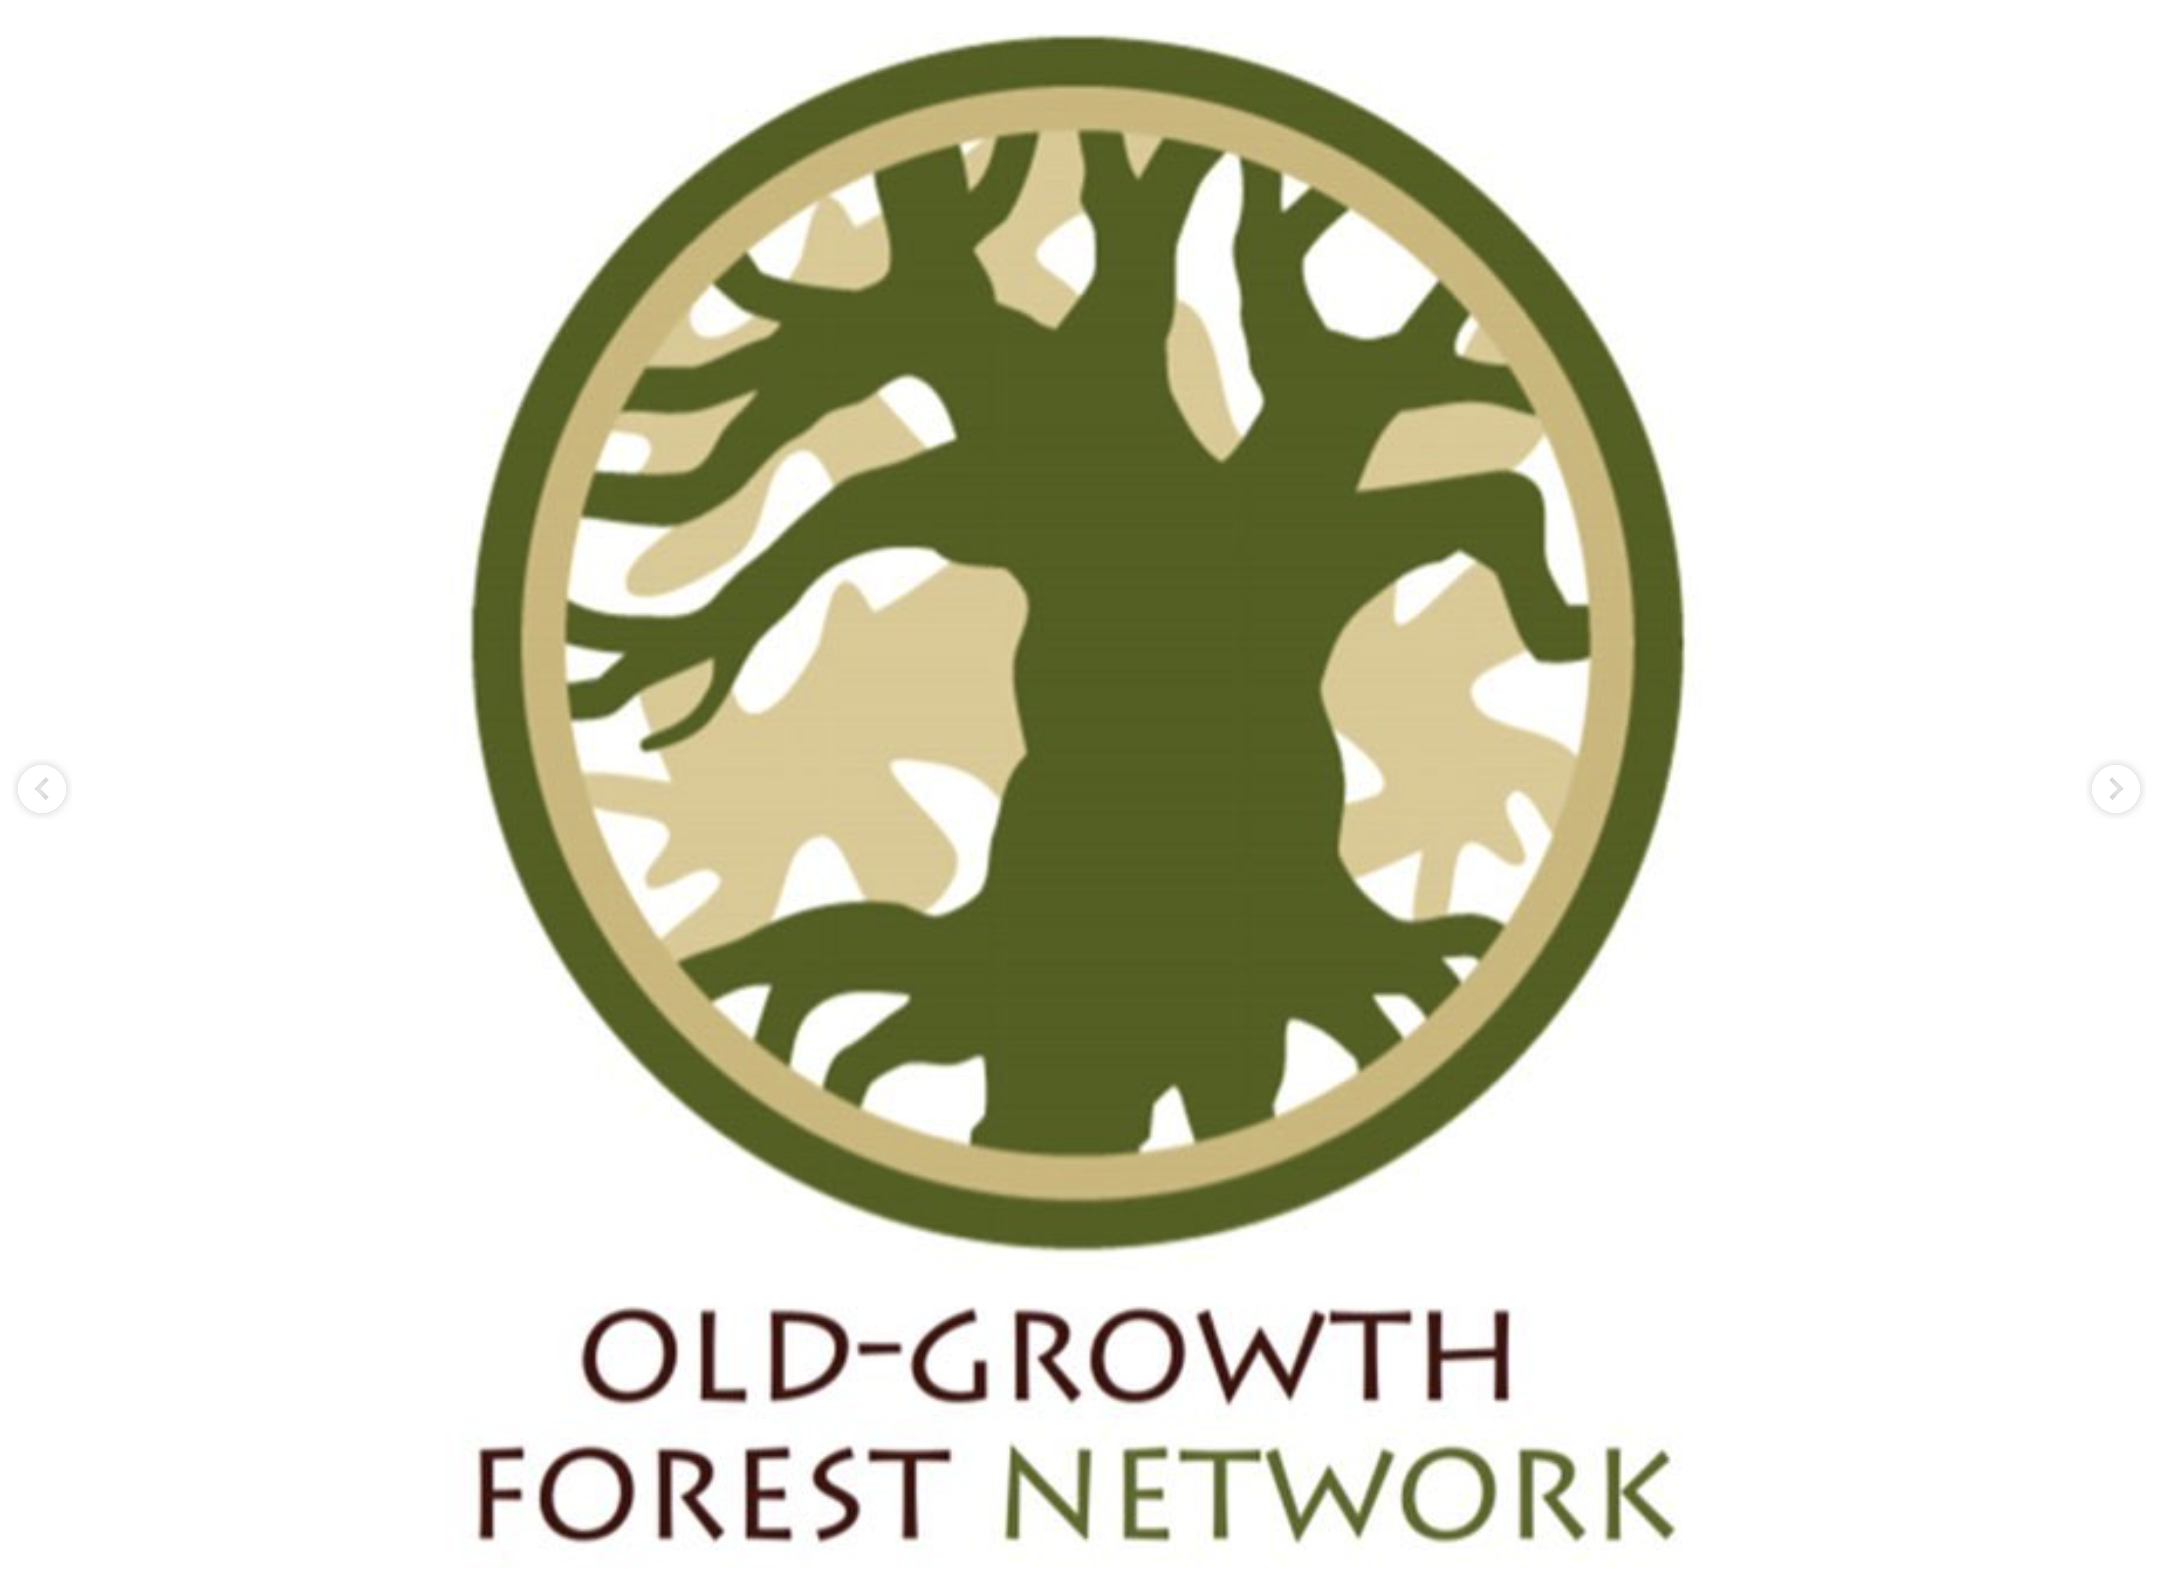 Old-Growth Forest Network logo